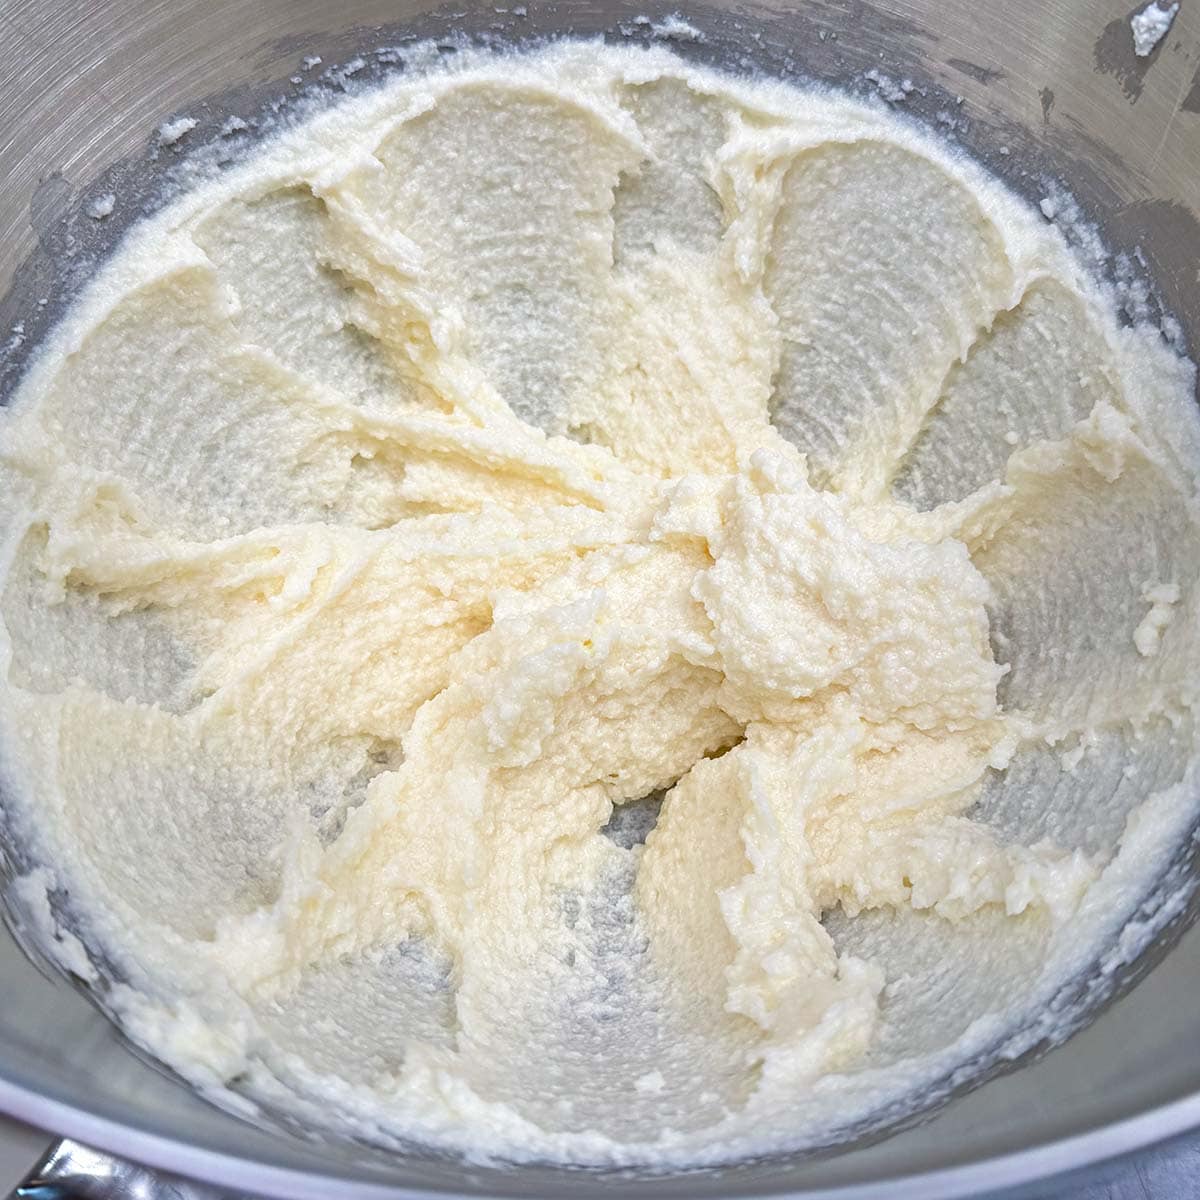 Ricotta cheese added to the butter-sugar mixture, looking a little lumpy.